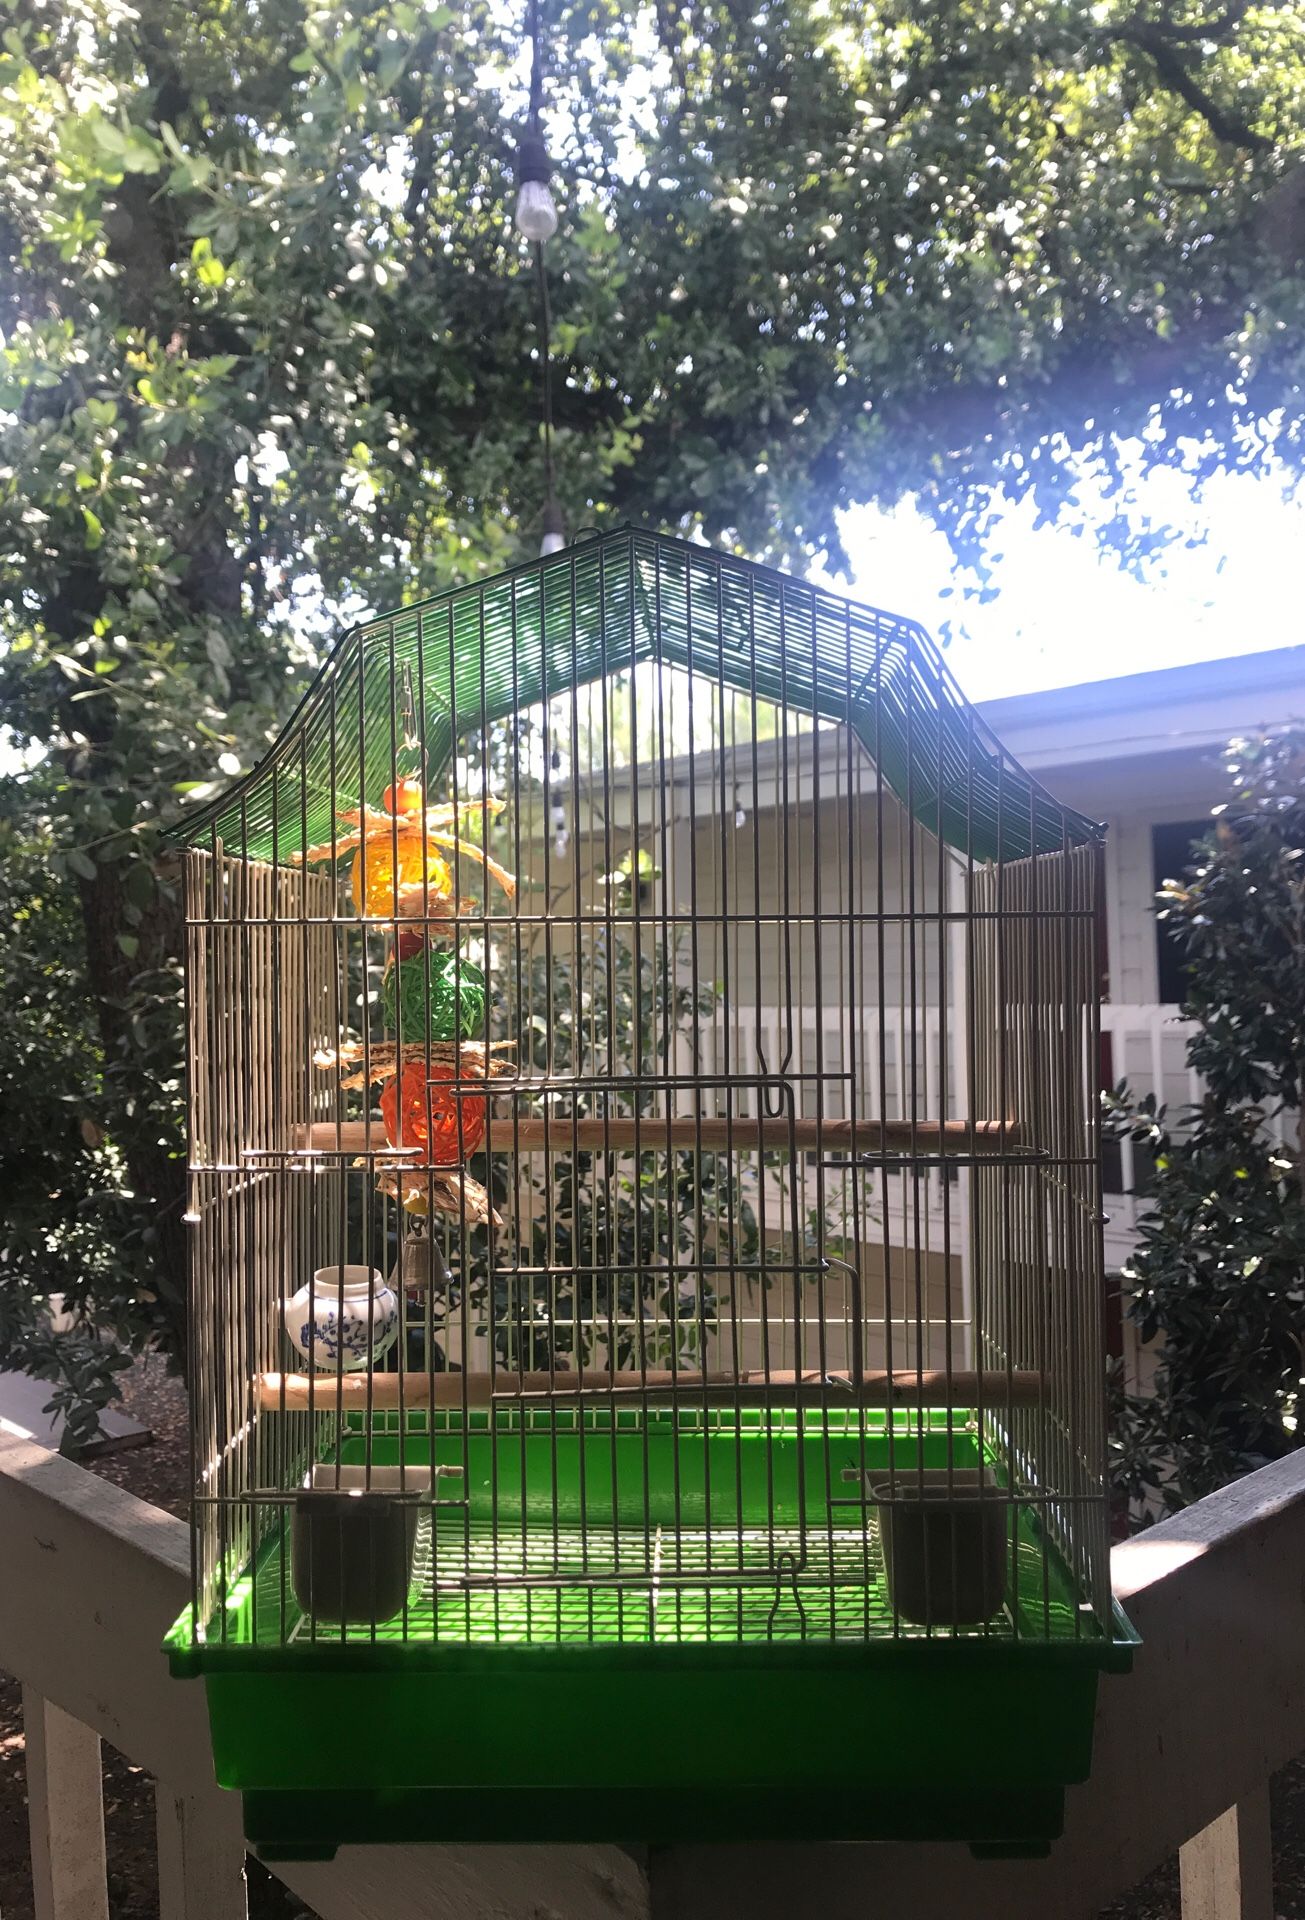 Bird cage with toy